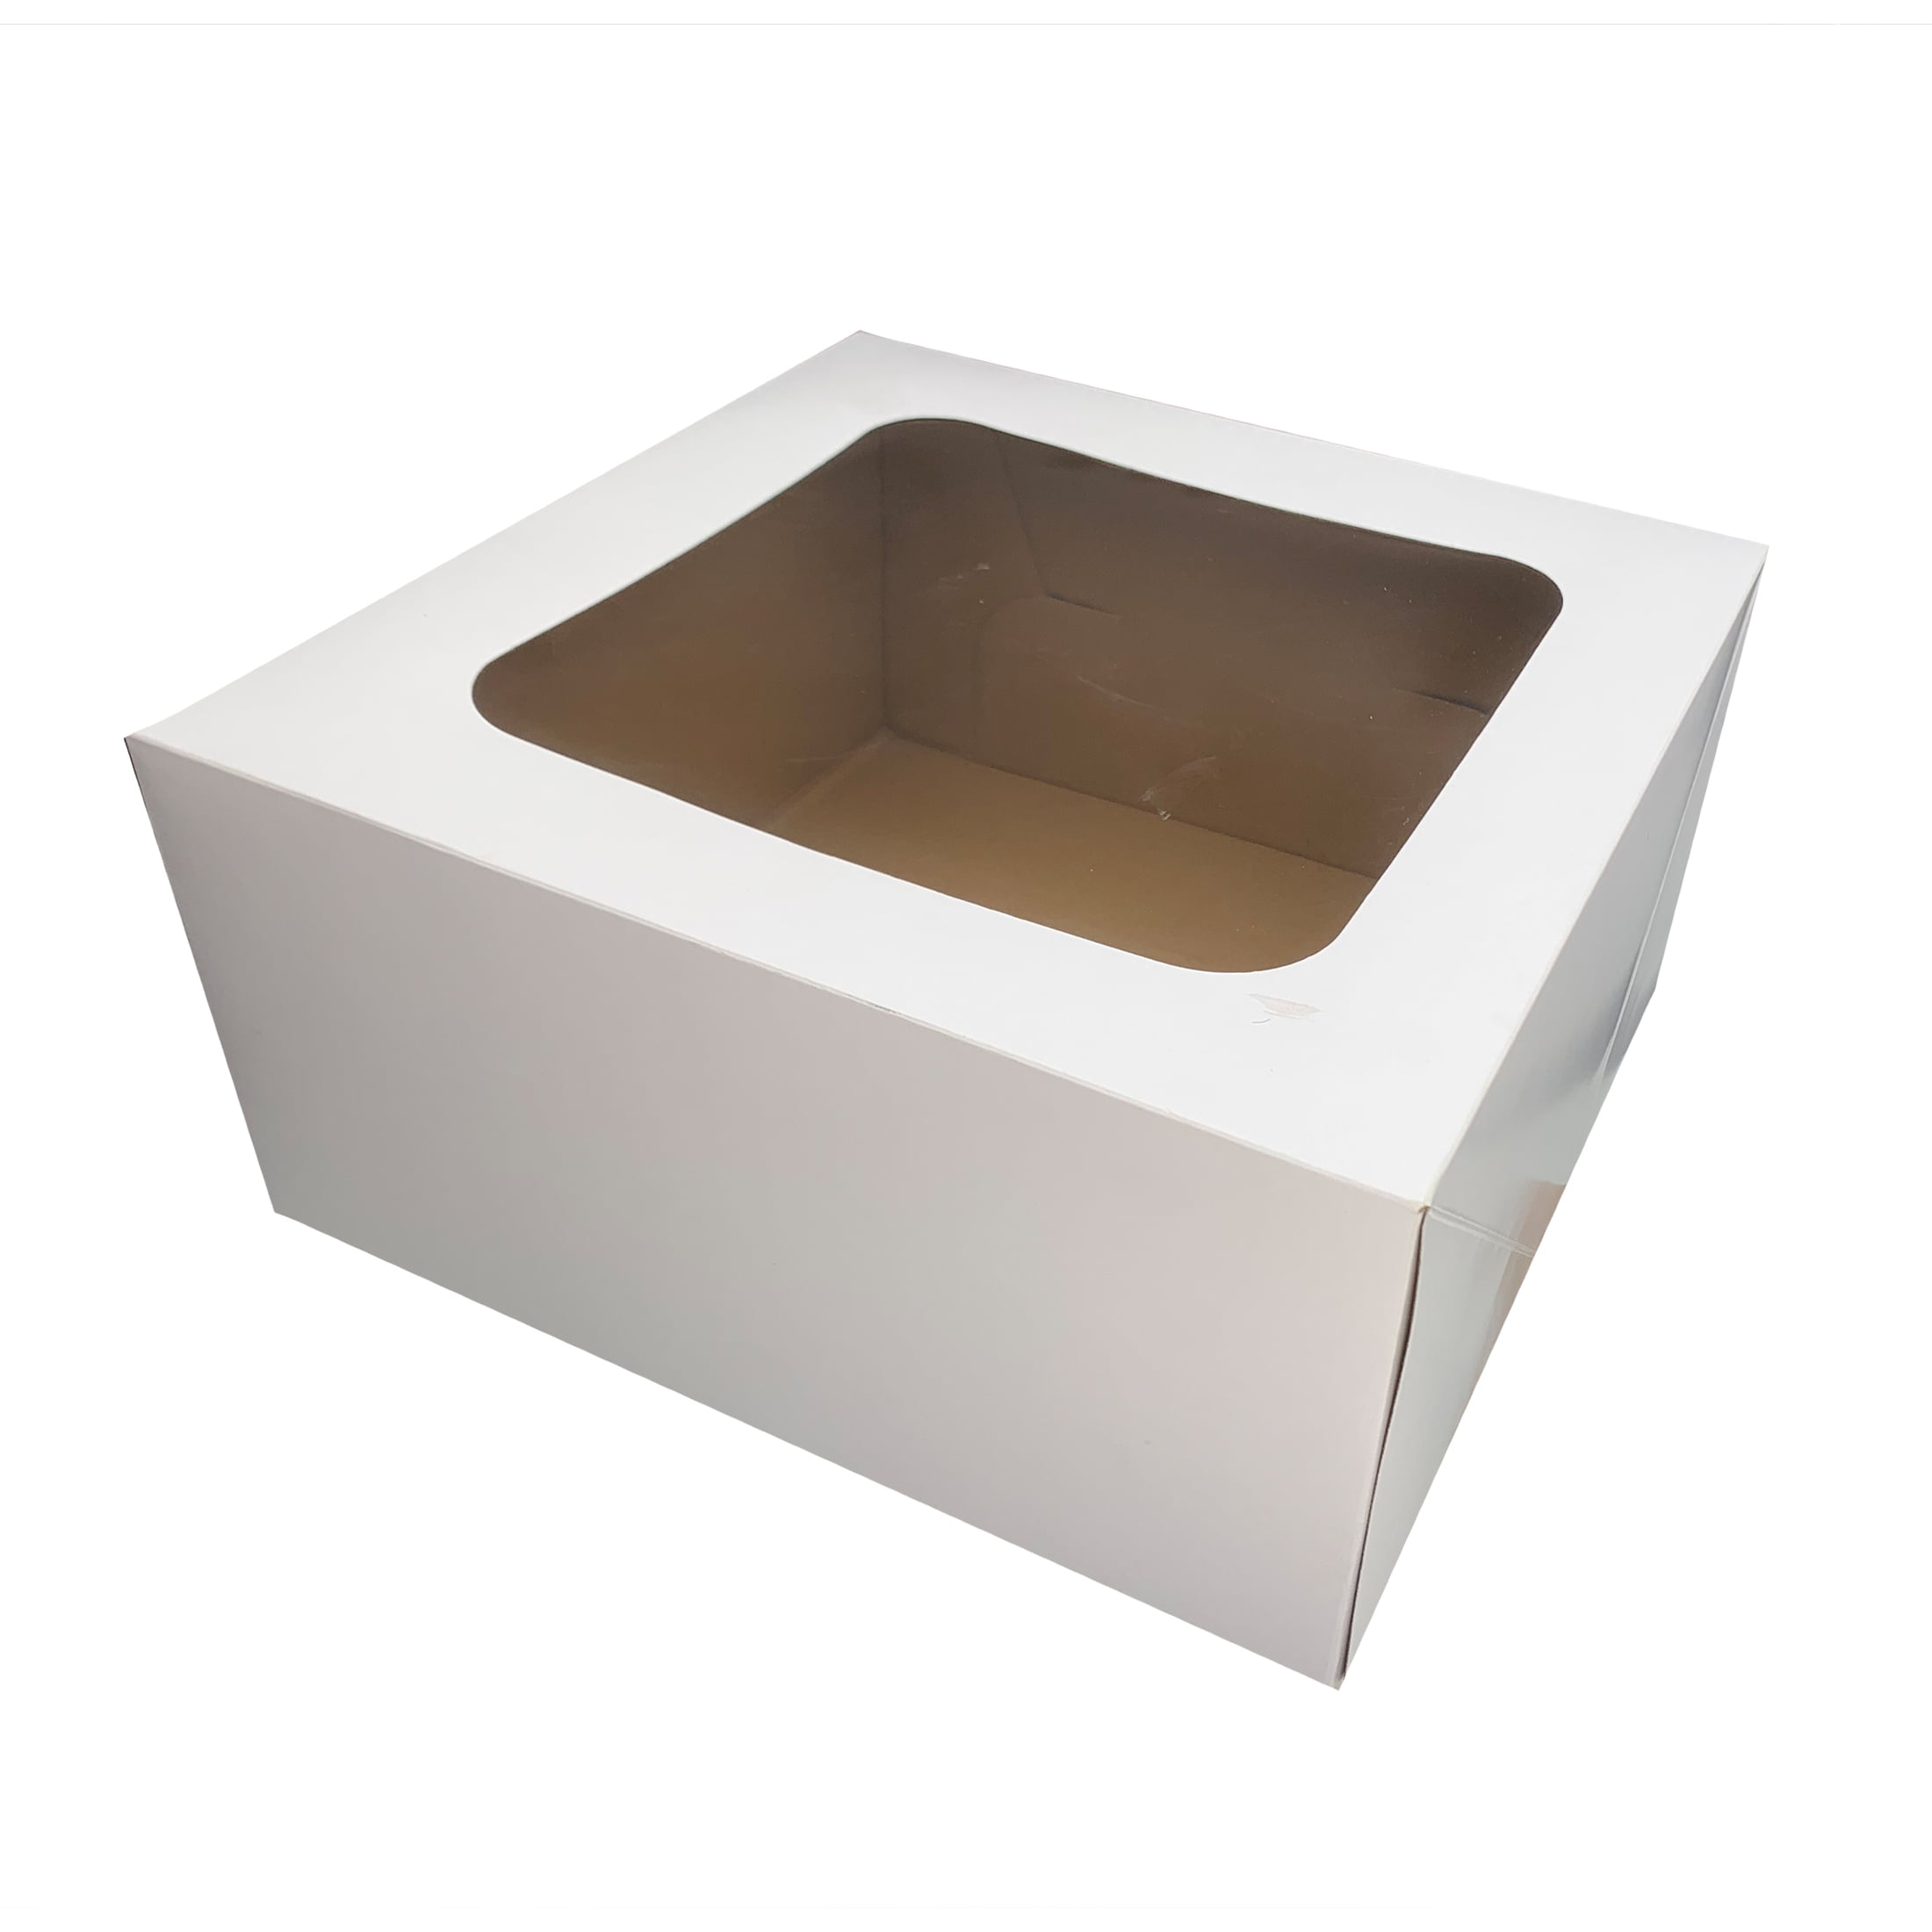 Way To Celebrate White Cake Boxes with Windows, 12" x 12" x 6", 2 Count